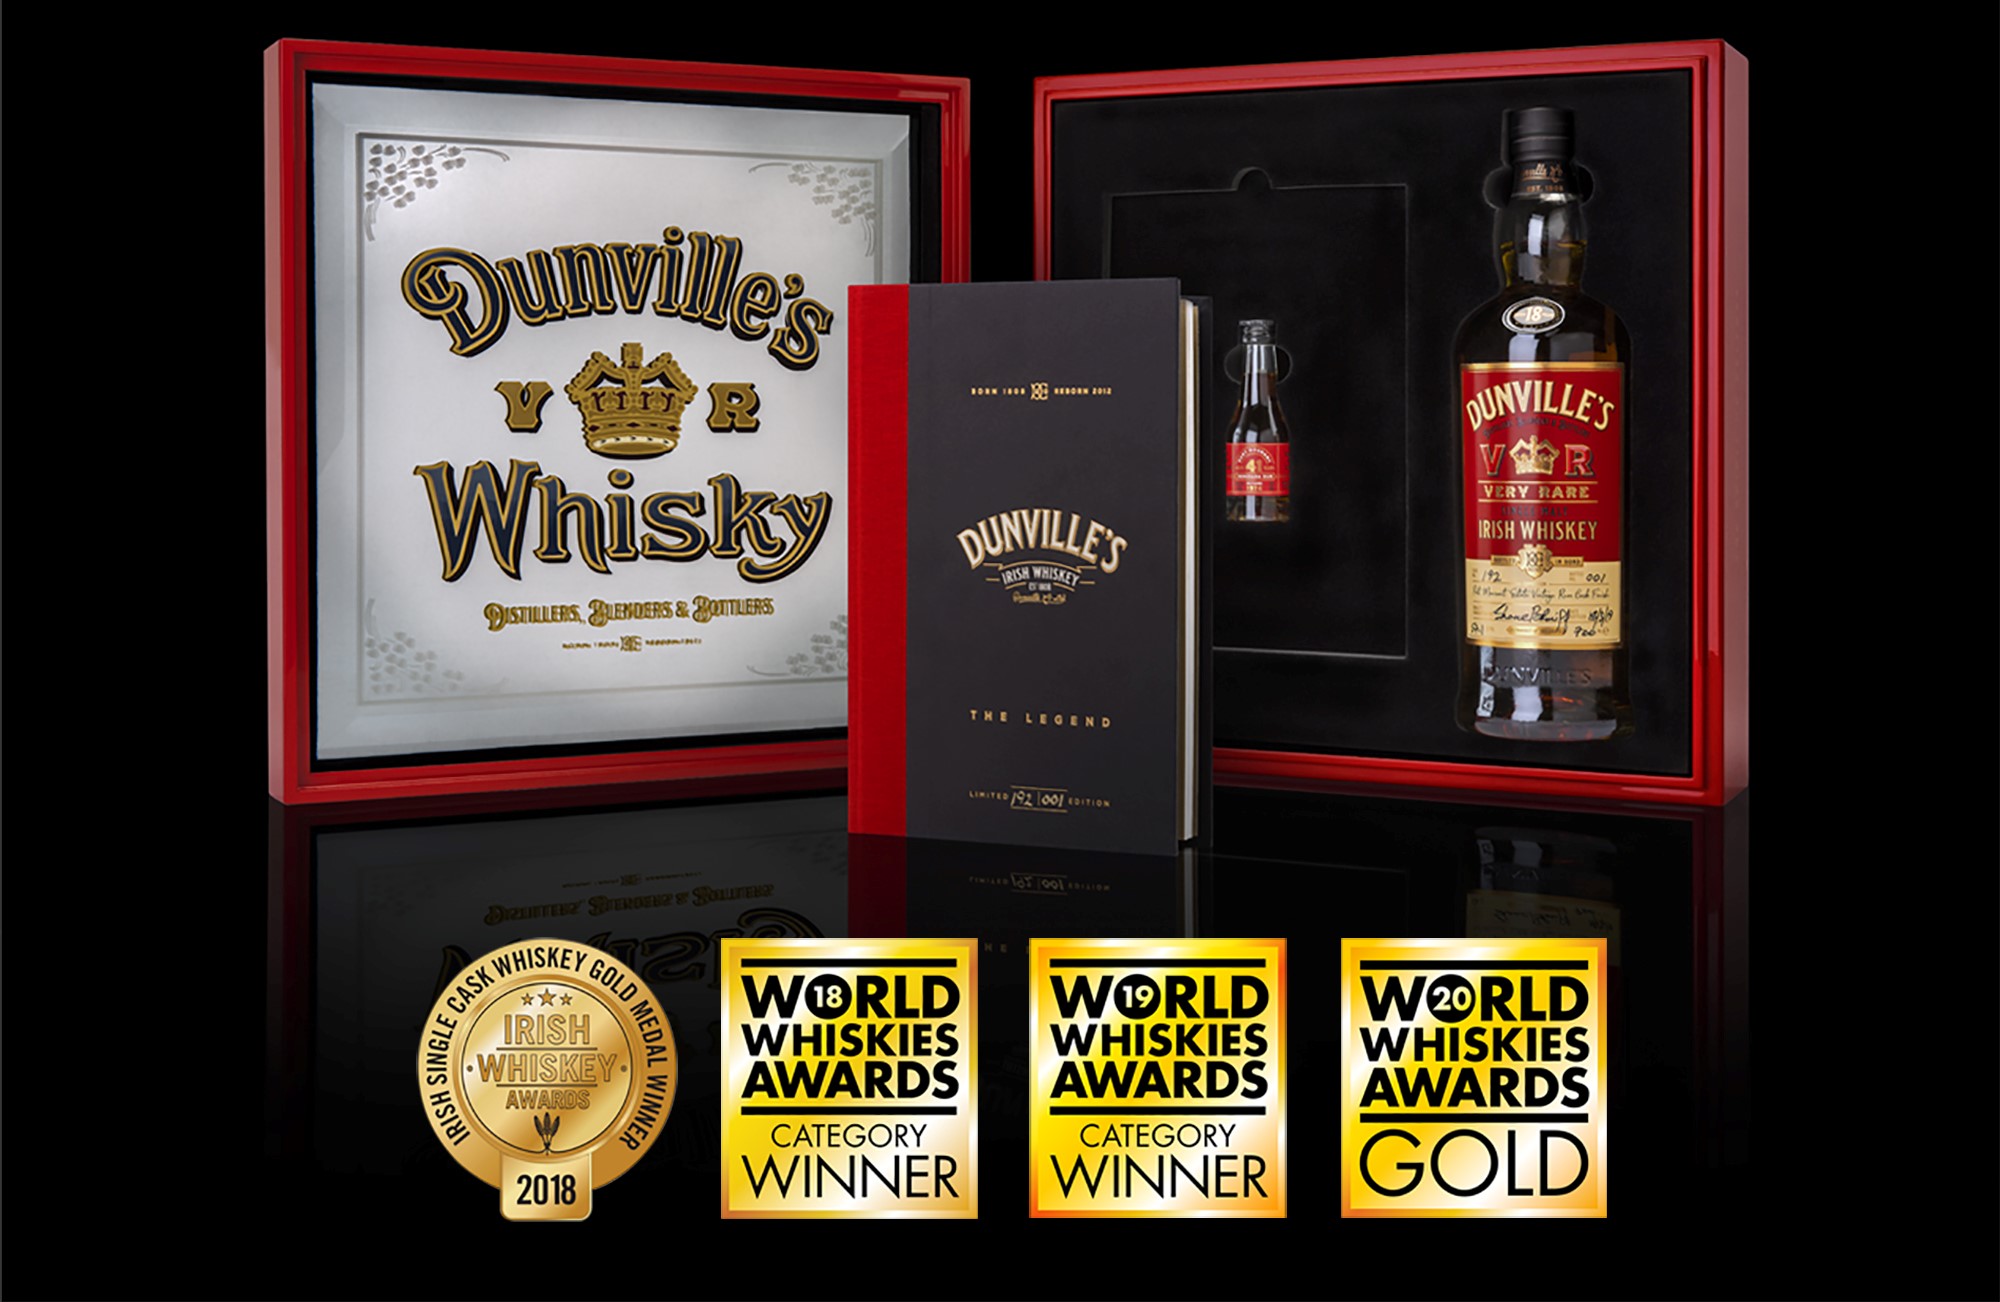 Dunville's VR Rum Finish 18 Year Old Irish Whiskey with presentation box and awards logos on black